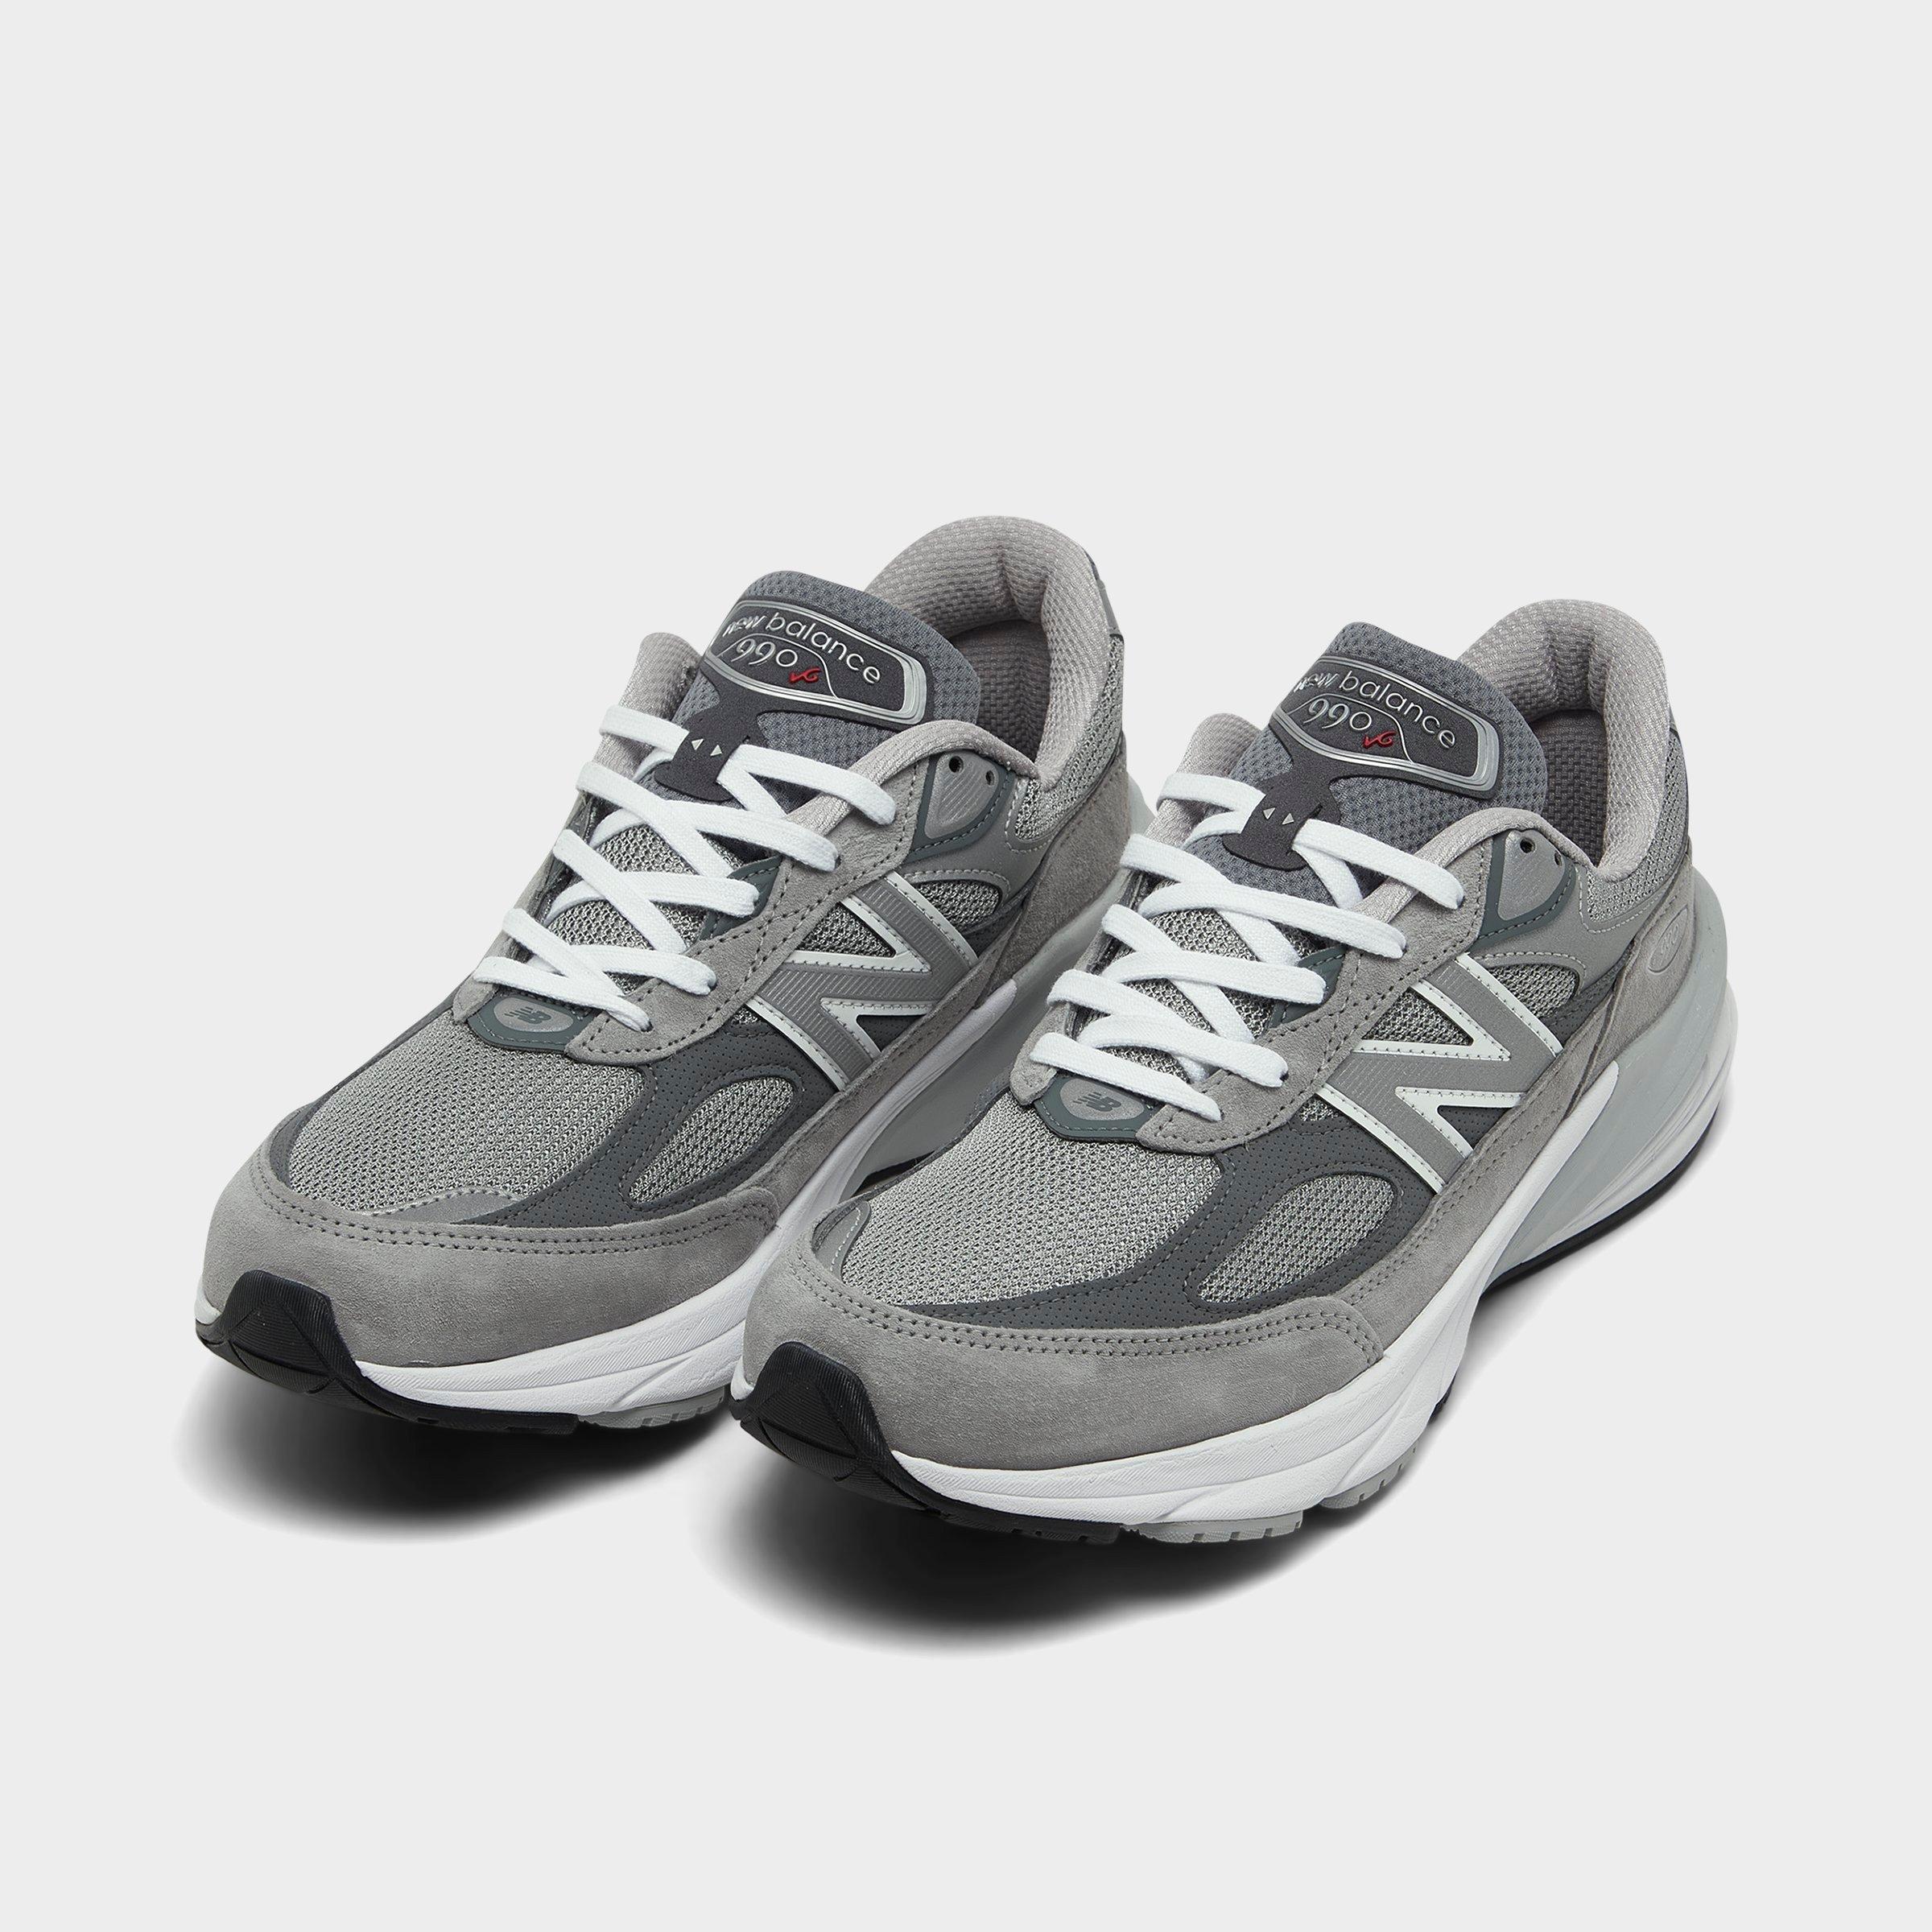 Men's New Balance Made in USA 990v6 Casual Shoes| JD Sports